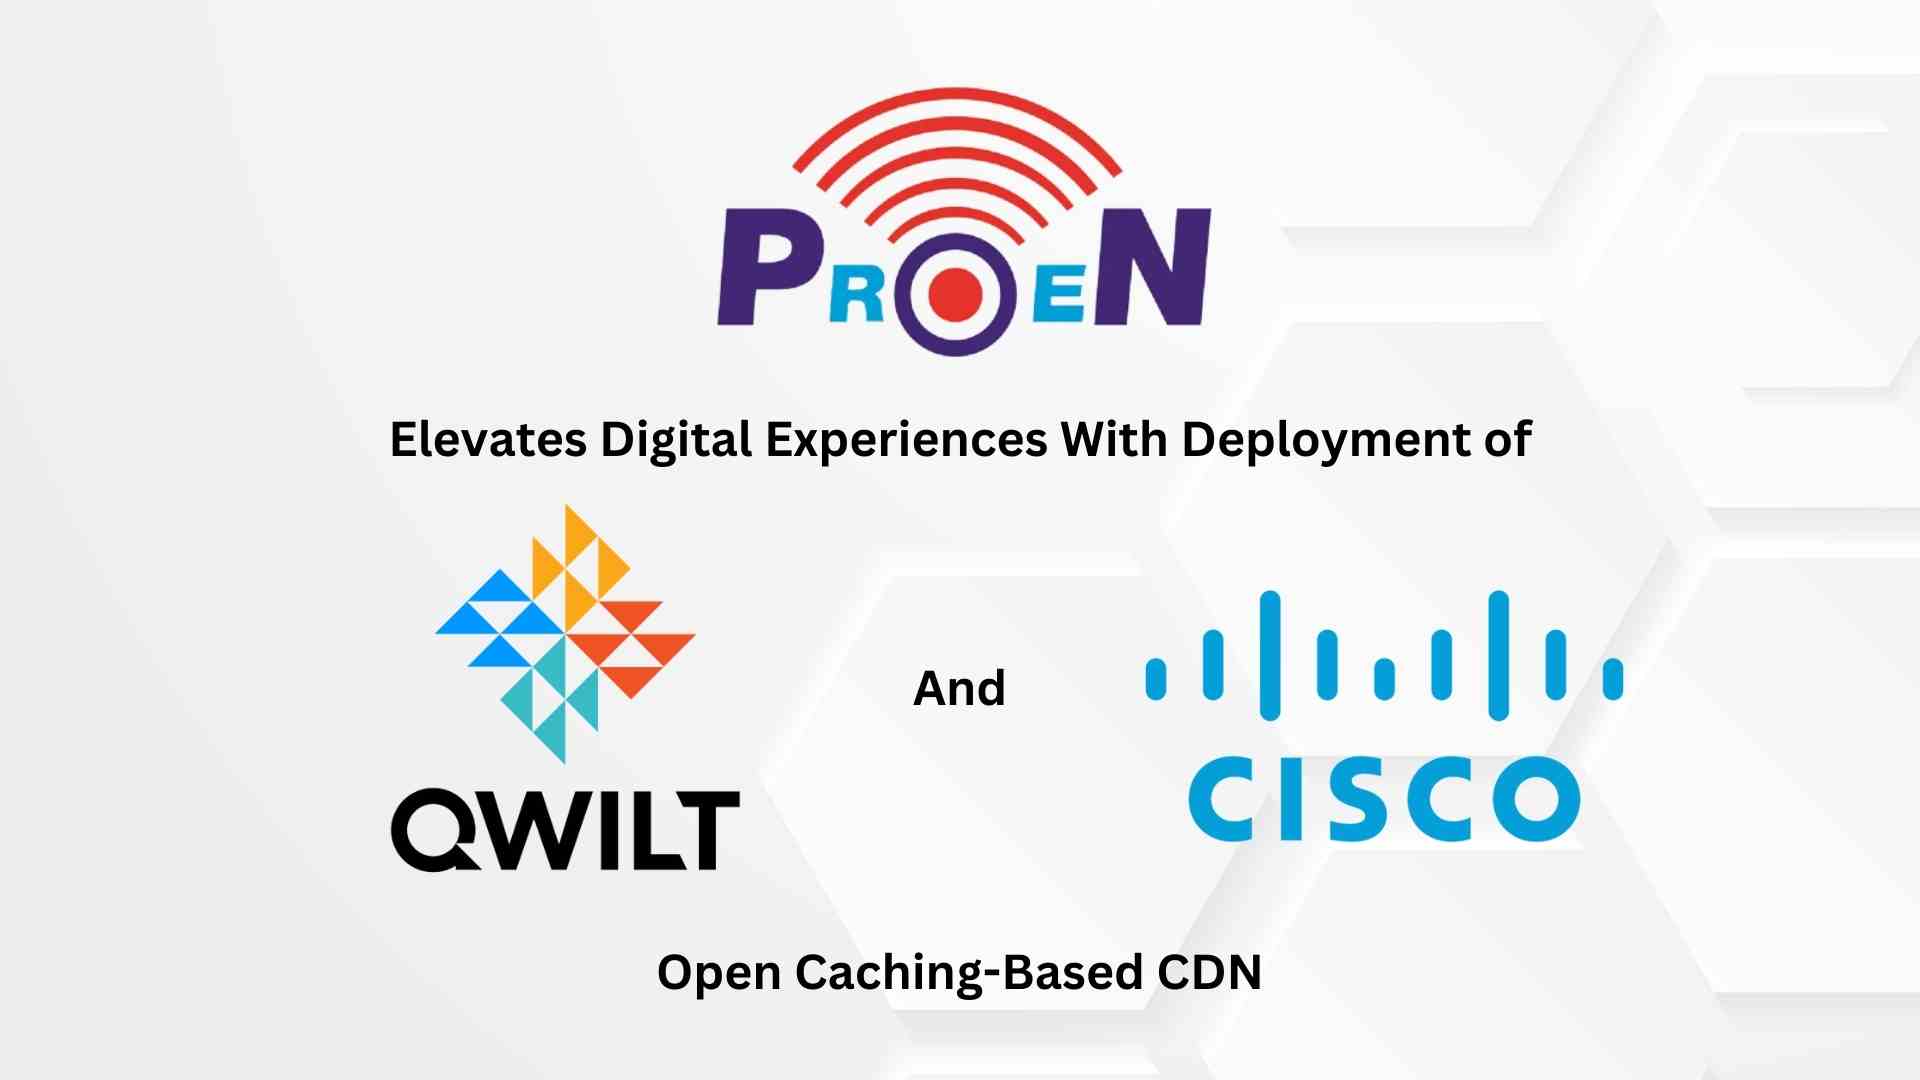 PROEN elevates digital experiences across Thailand with deployment of Qwilt and Cisco’s Open Caching-based CDN